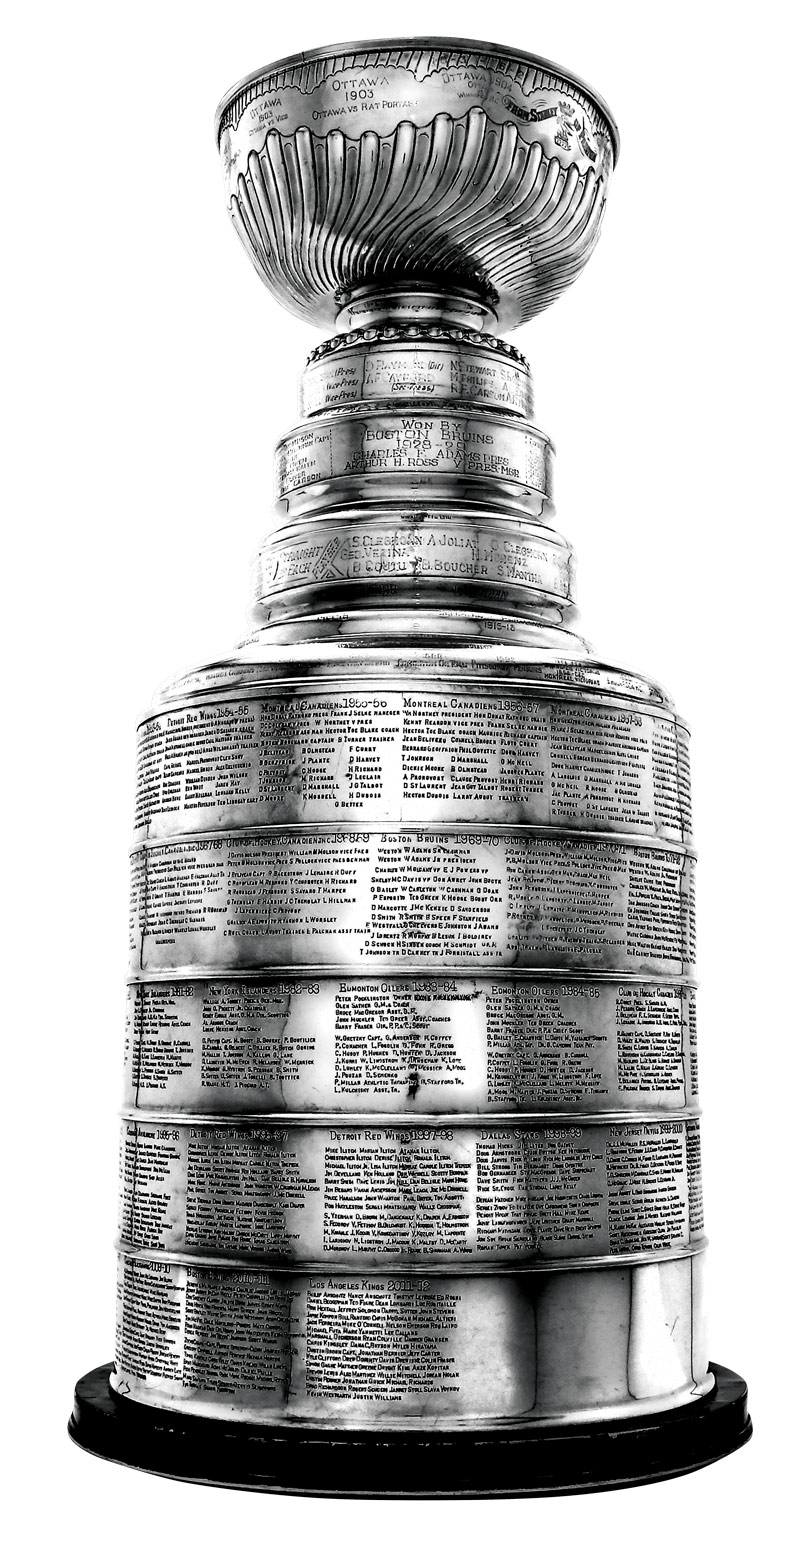 Stanley Cup - Is it Worth It?